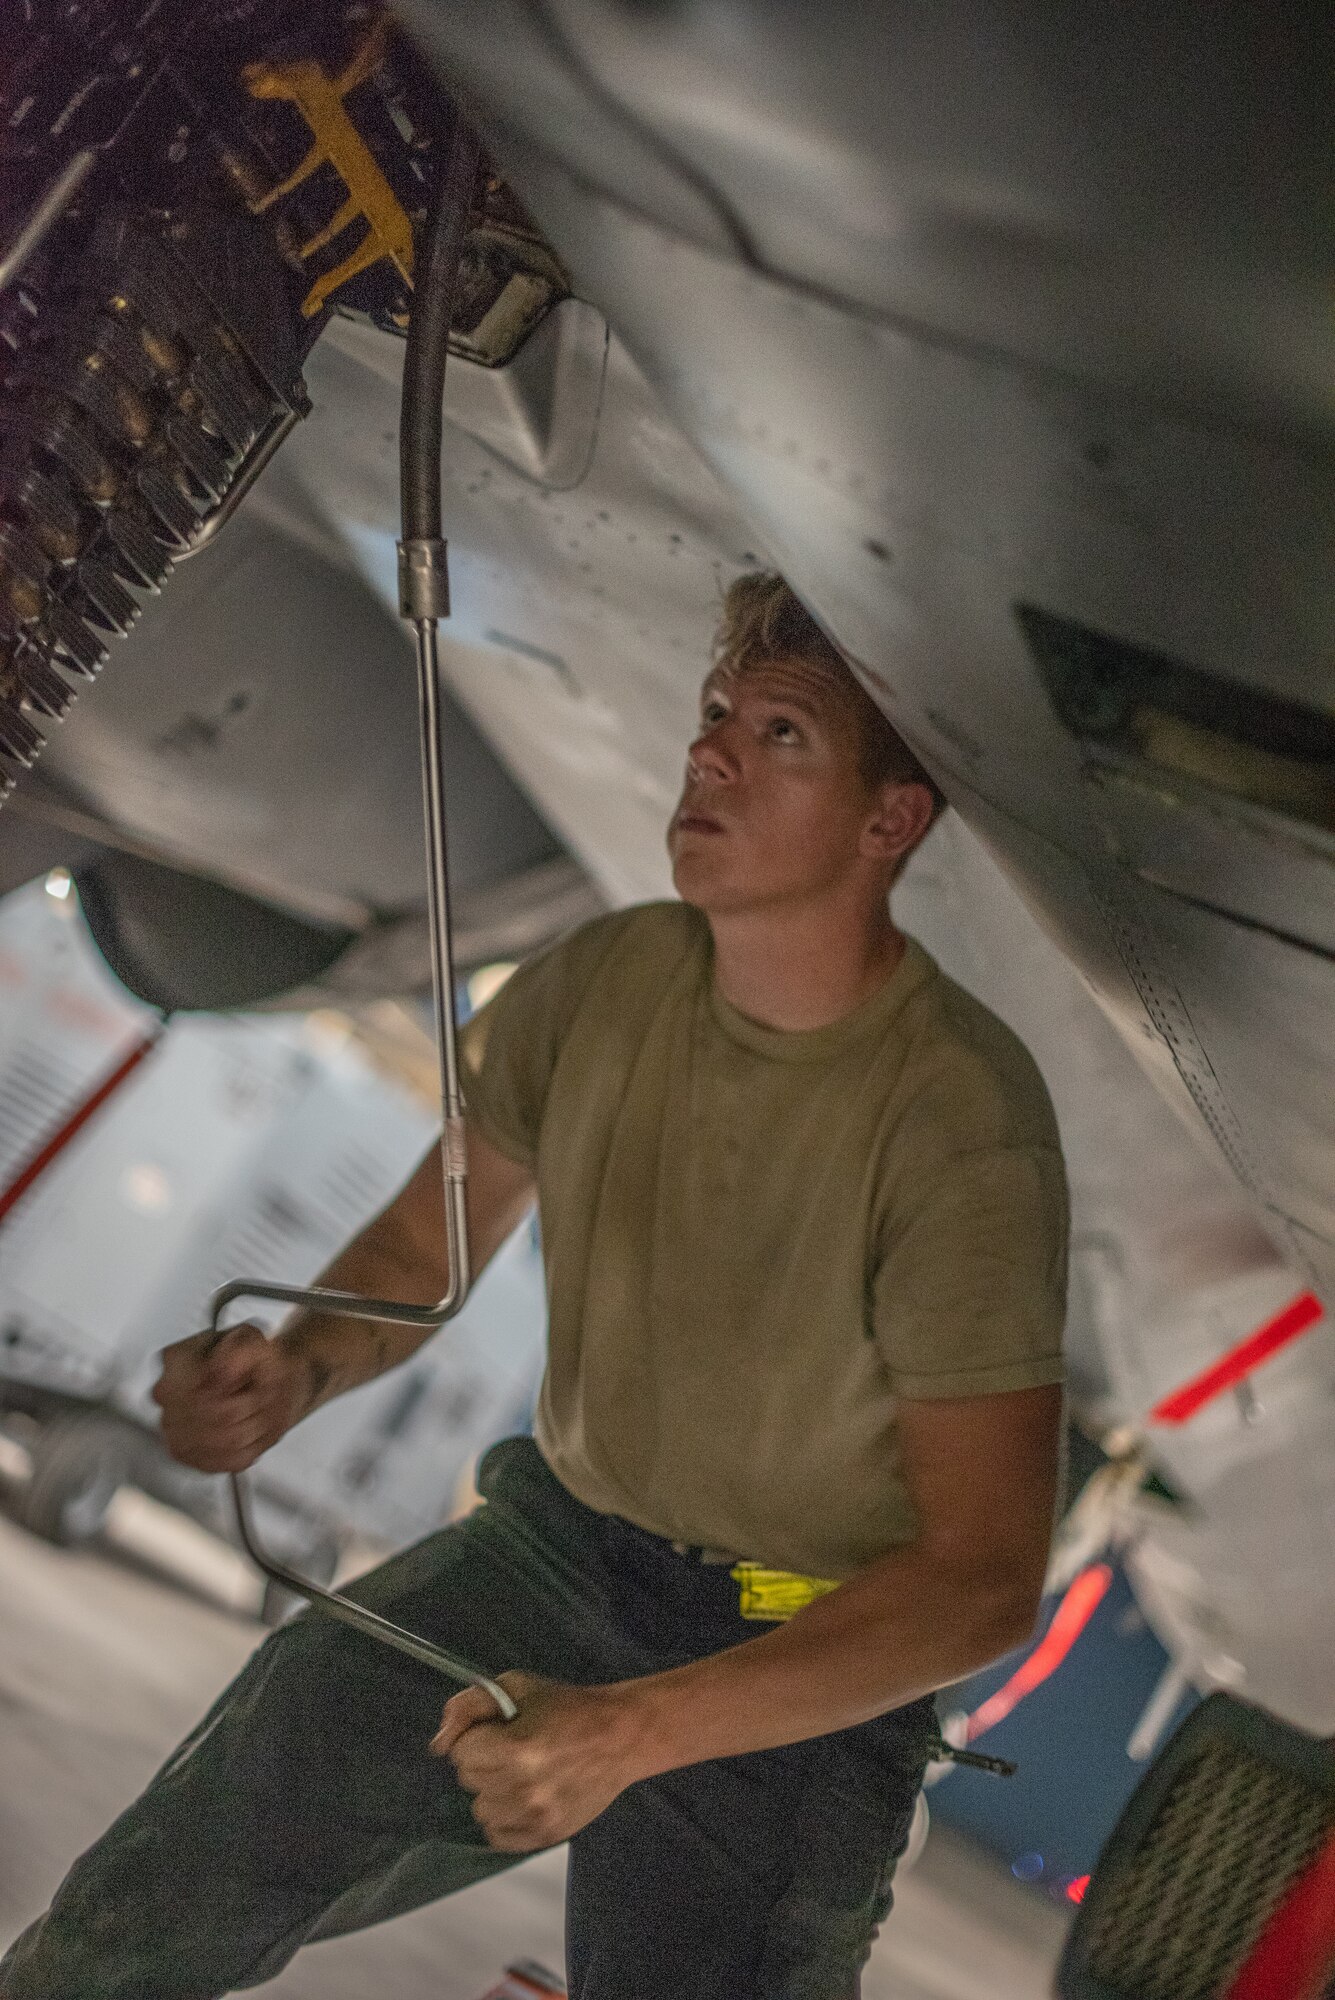 Senior Airman Sean Logan, 380th Expeditionary Aircraft Maintenance Squadron weapons load crew team member, loads an F-15E Strike Eagle with 20mm high-explosive incendiary bullets July 15, 2019, at Al Dhafra Air Base, United Arab Emirates. Weapons load crews work 24/7 operations to support loading and configuring various munitions for the F-35A Lightning II, F-15E Strike Eagle and F-15C Eagle jets at ADAB. (U.S. Air Force photo by Staff Sgt. Chris Thornbury)